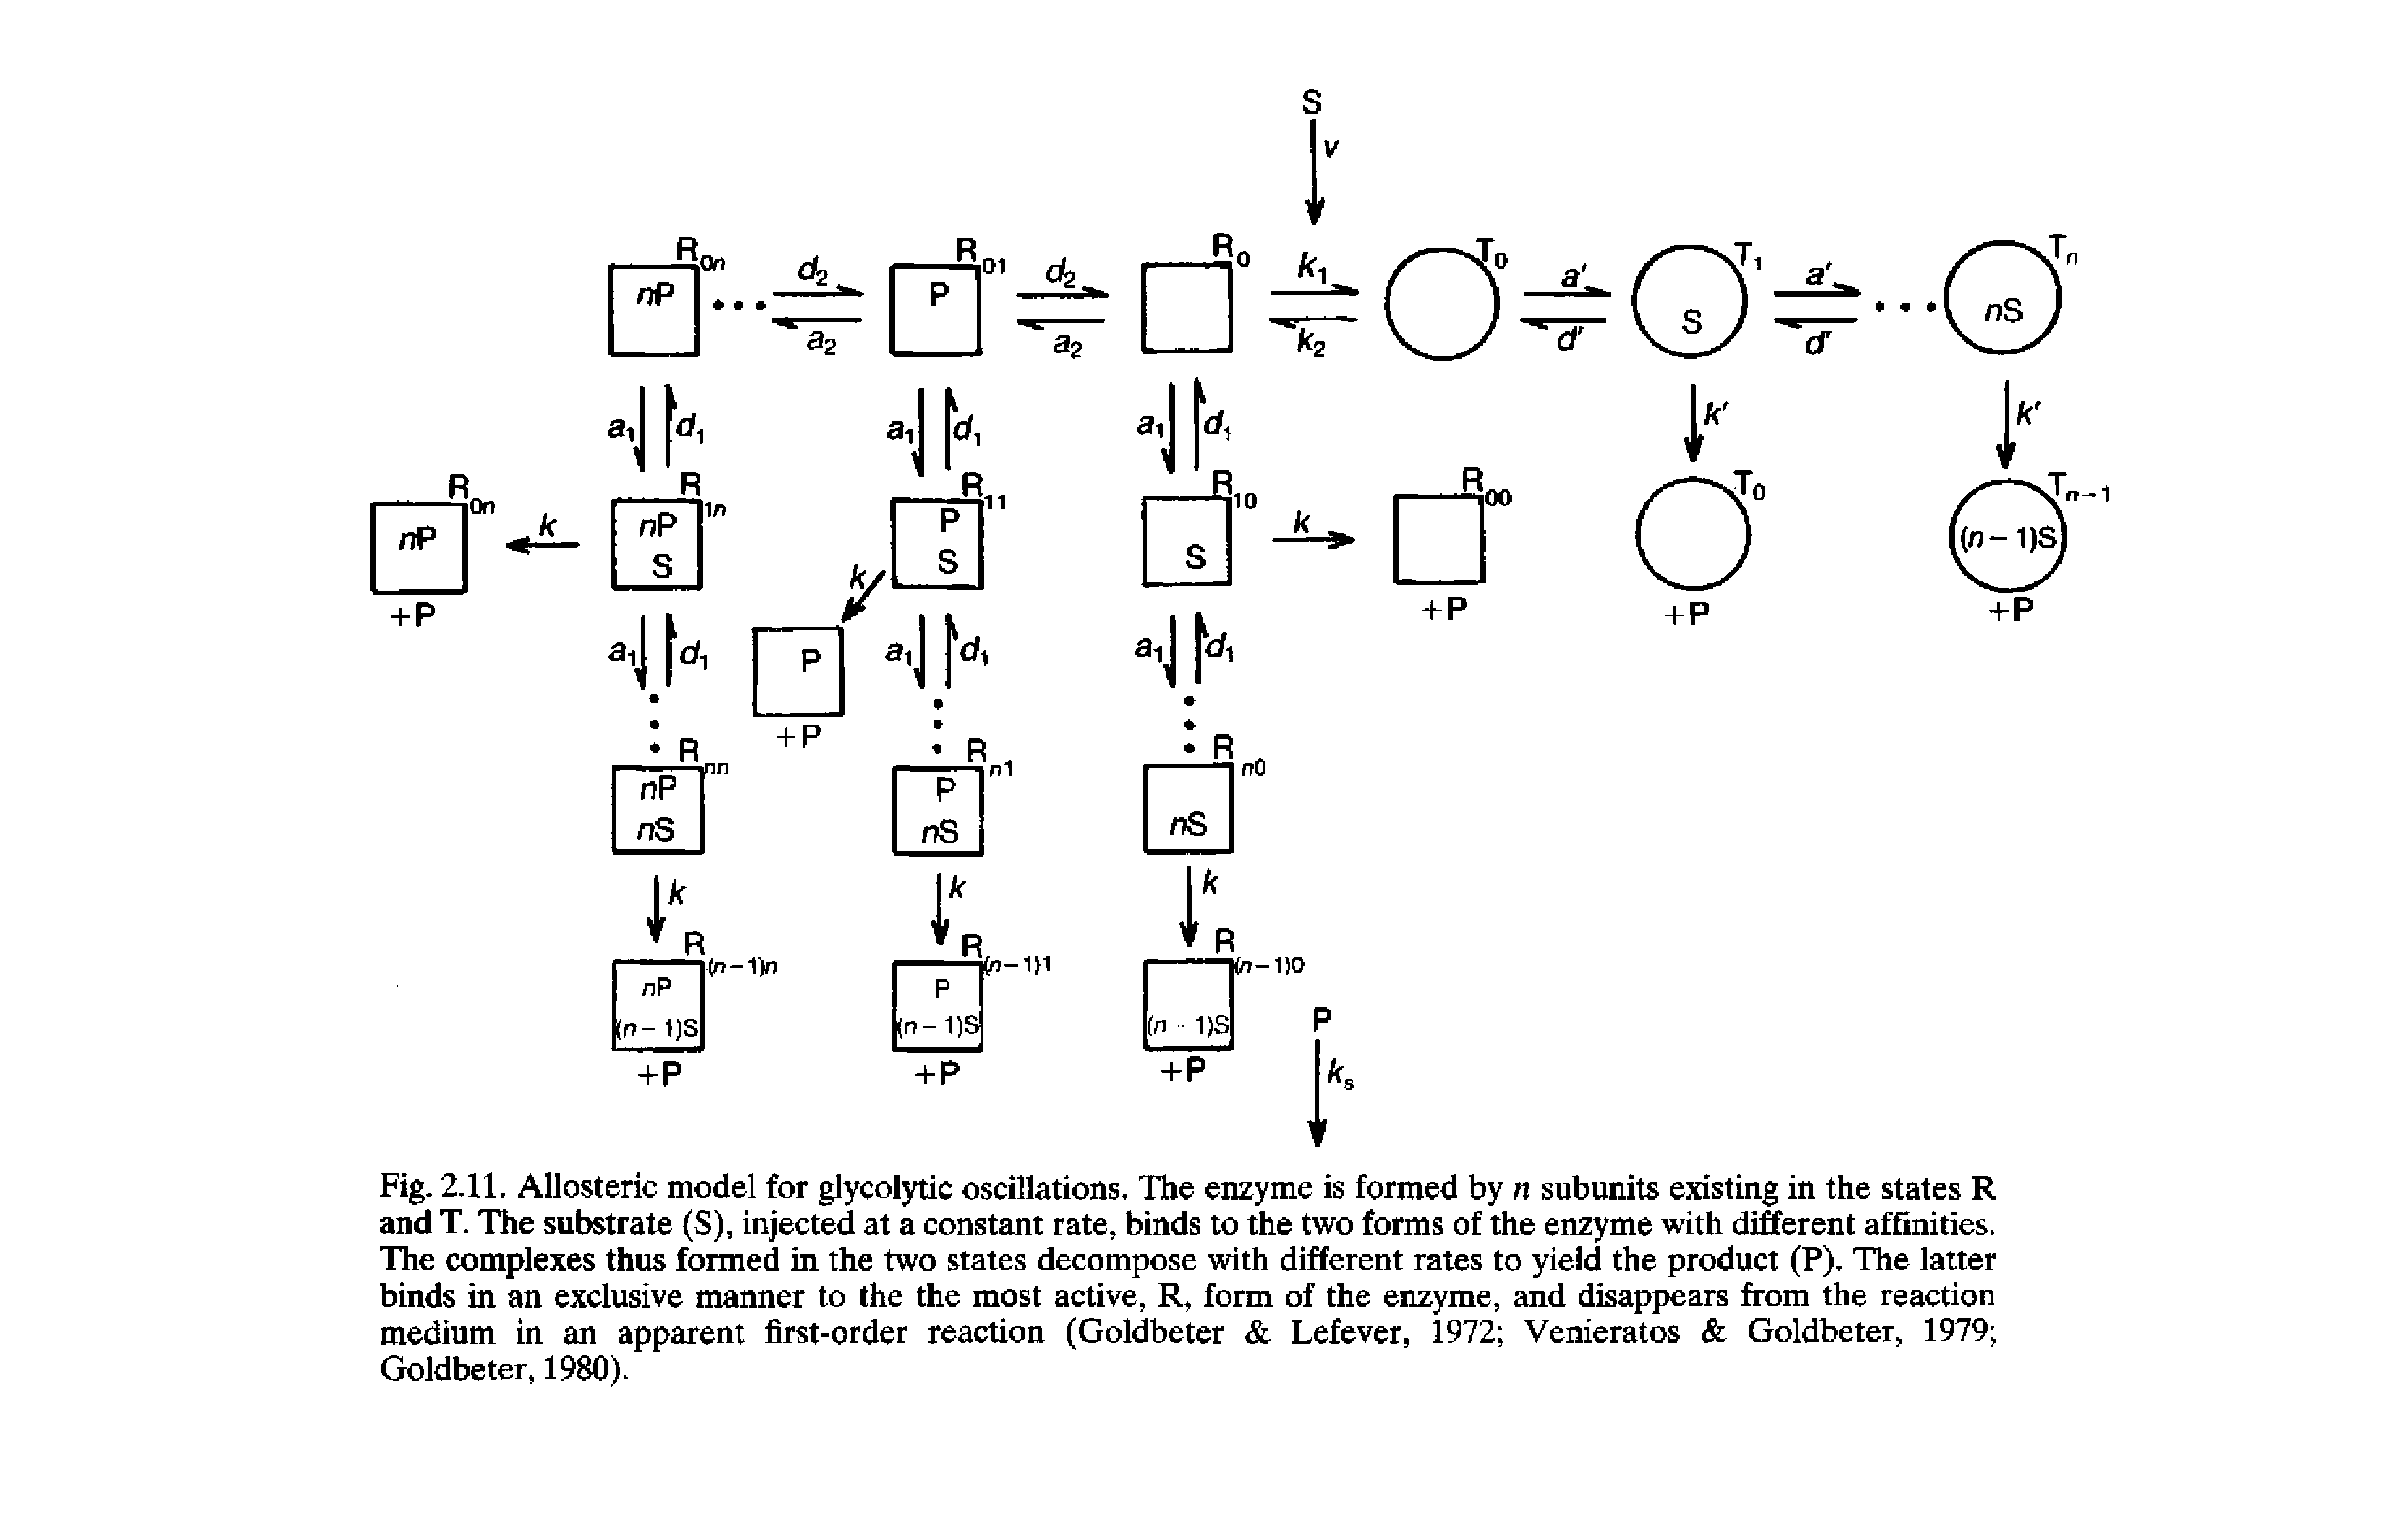 Fig. 2.11. Allosteric model for glycolytic oscillations. The enzyme is formed by n subunits existing in the states R and T. The substrate (S), injected at a constant rate, binds to the two forms of the enzyme with different affinities. The complexes thus formed in the two states decompose with different rates to yield the product (P). The latter binds in an exclusive manner to the the most active, R, form of the enzyme, and disappears from the reaction medium in an apparent first-order reaction (Goldbeter Lefever, 1972 Venieratos Goldbeter, 1979 Goldbeter, 1980).